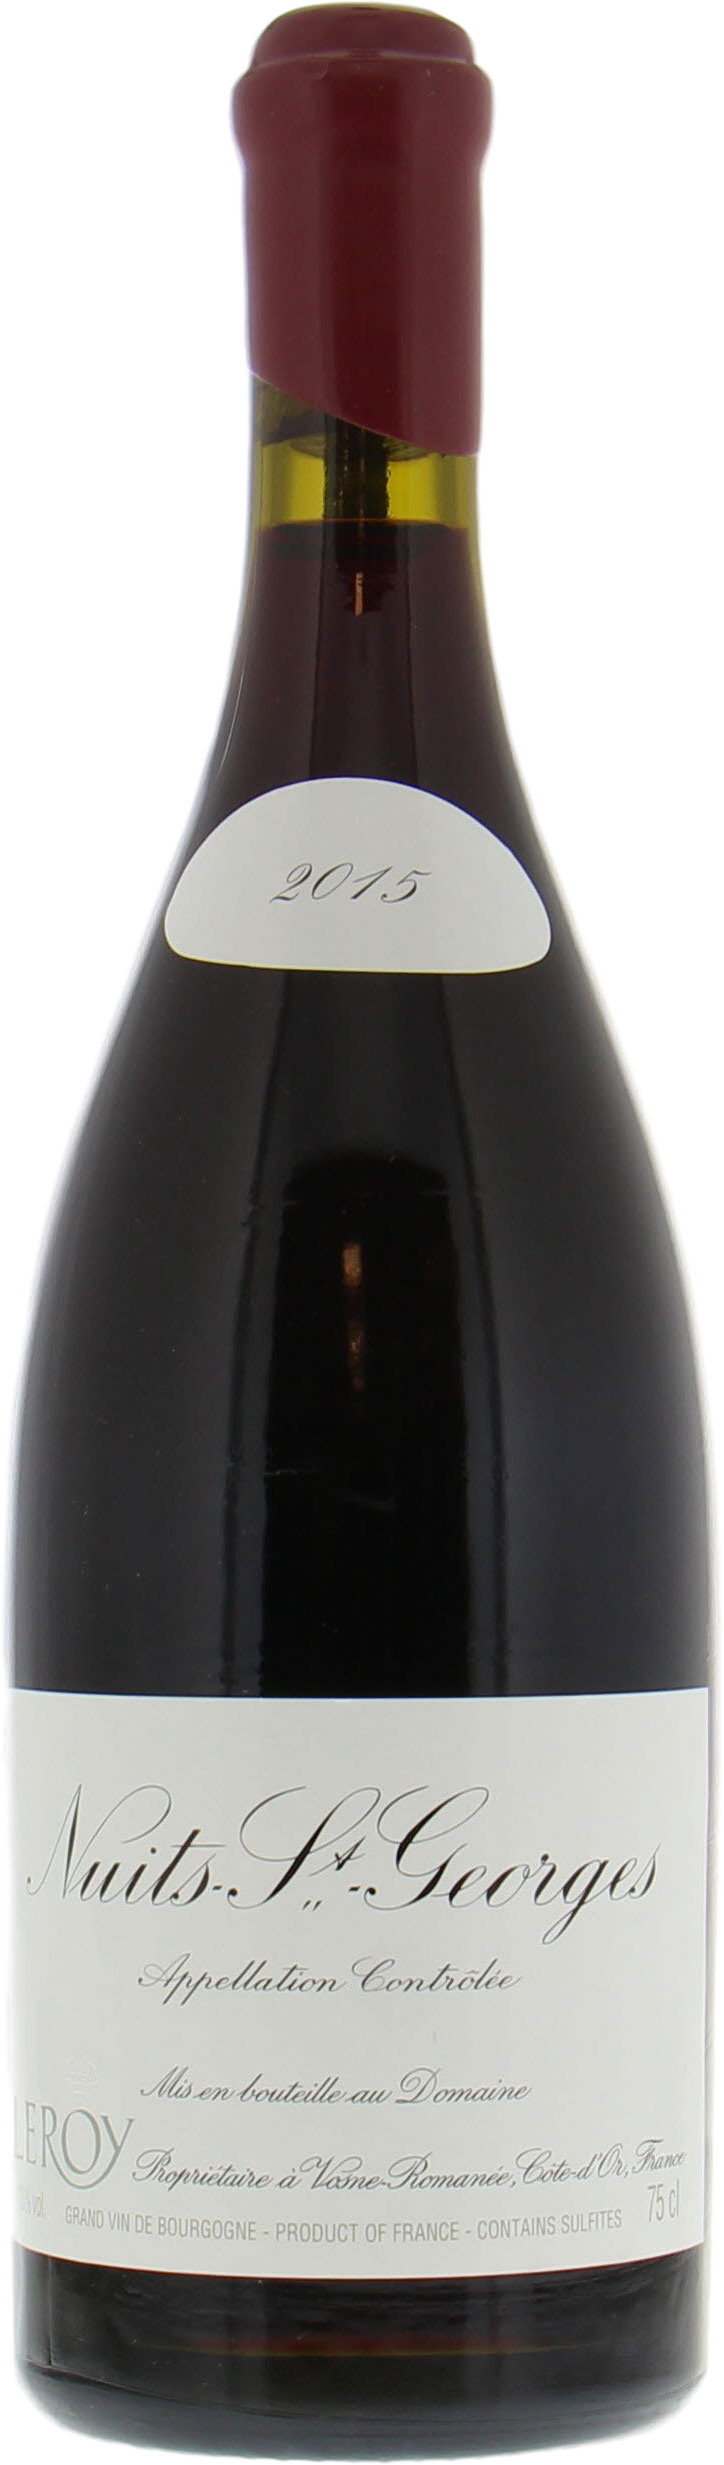 Nuits St. Georges 2015 - Domaine Leroy | Buy Online | Best of Wines